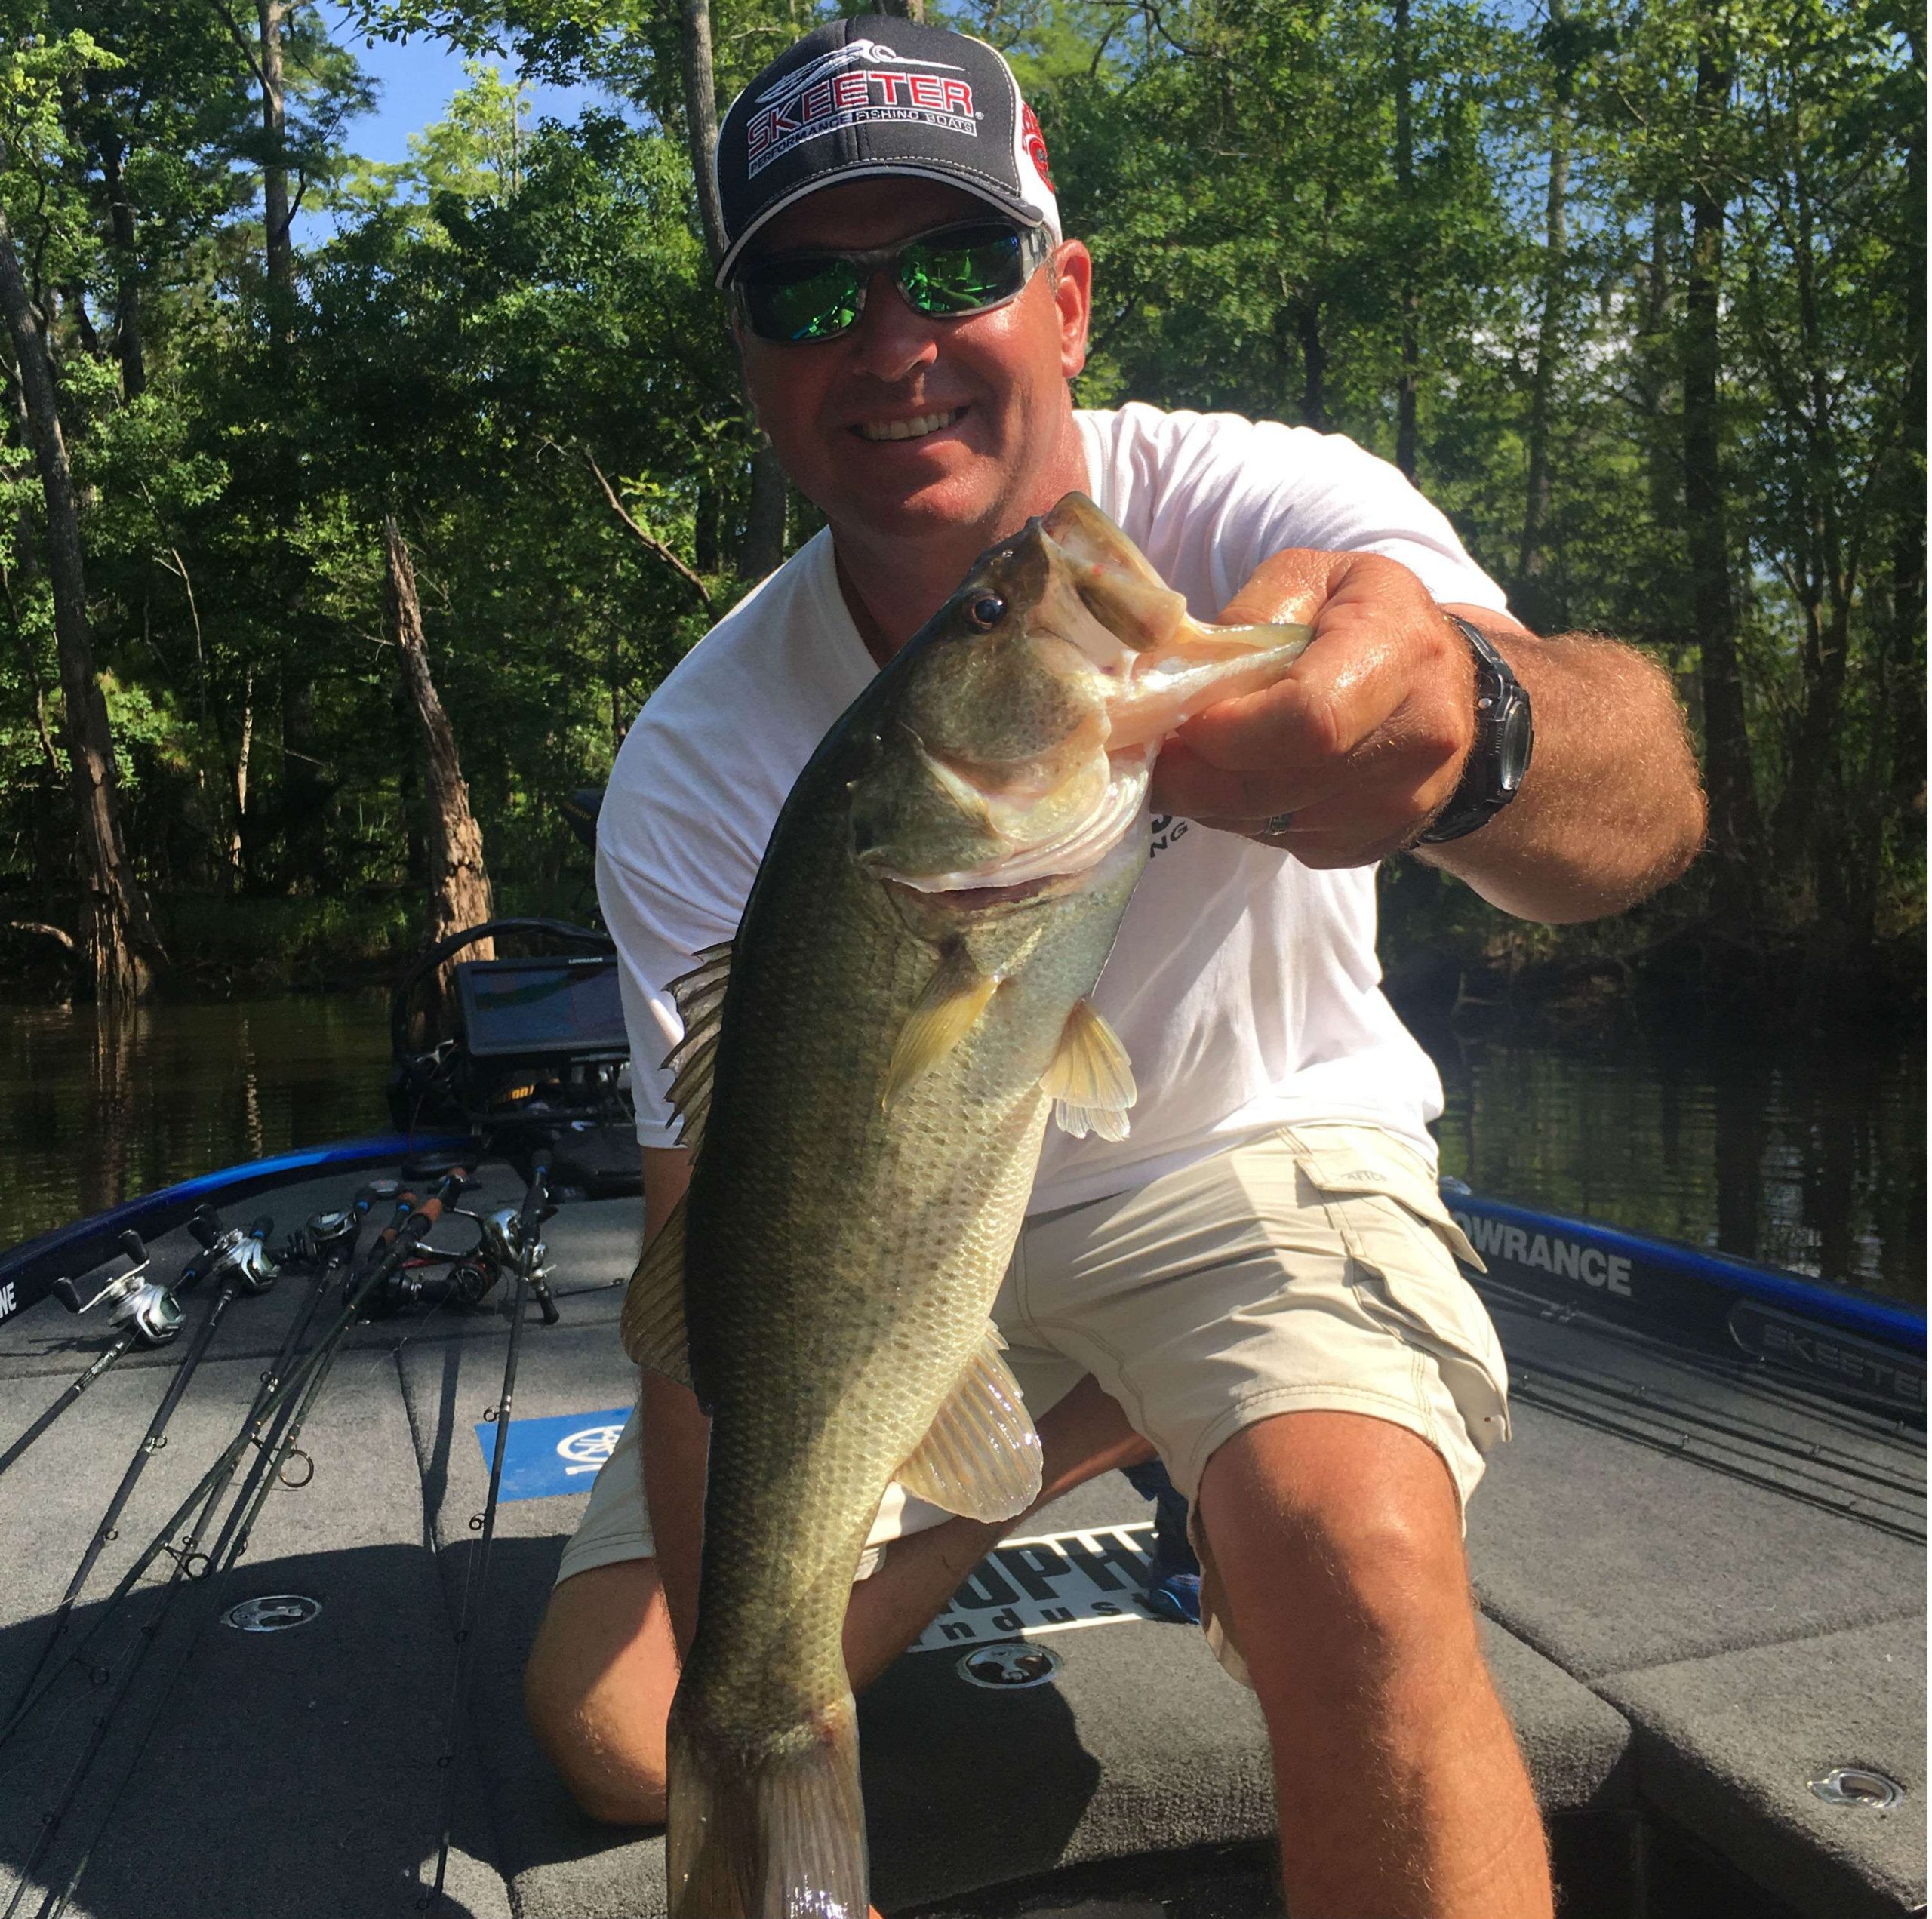 Todd Faircloth is starting to get on some nice fish after a slow start. Keeper number four. 